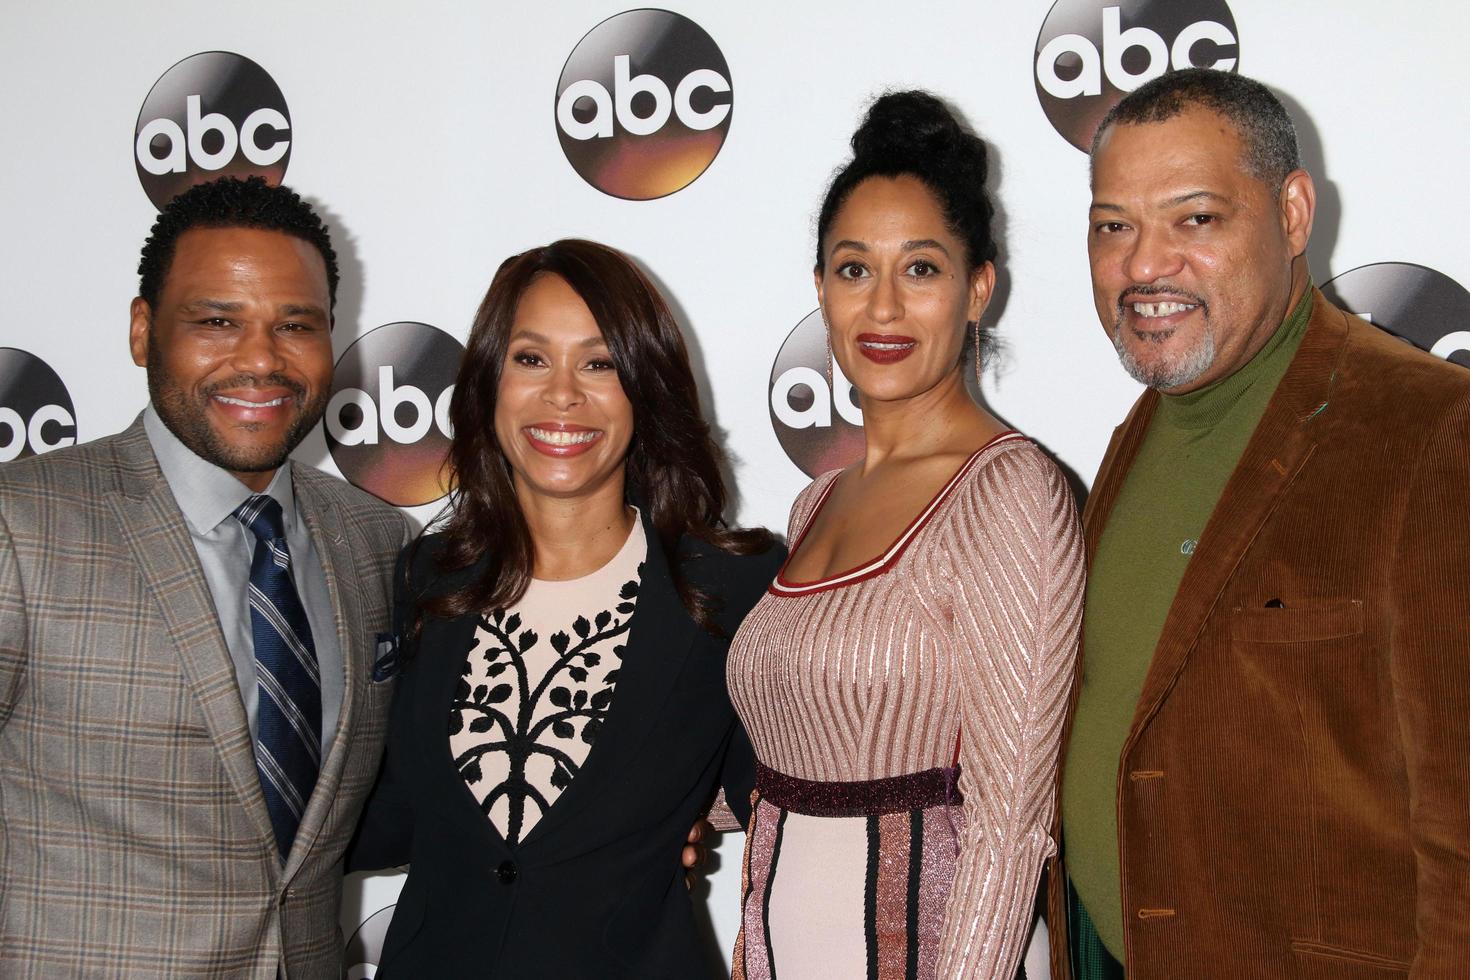 los angeles, 10. jan - anthony anderson, channing dungey, tracee ellis ross, laurence fishburne bei der disney abc tv tca winter 2017 party im langham hotel am 10. januar 2017 in pasadena, ca foto